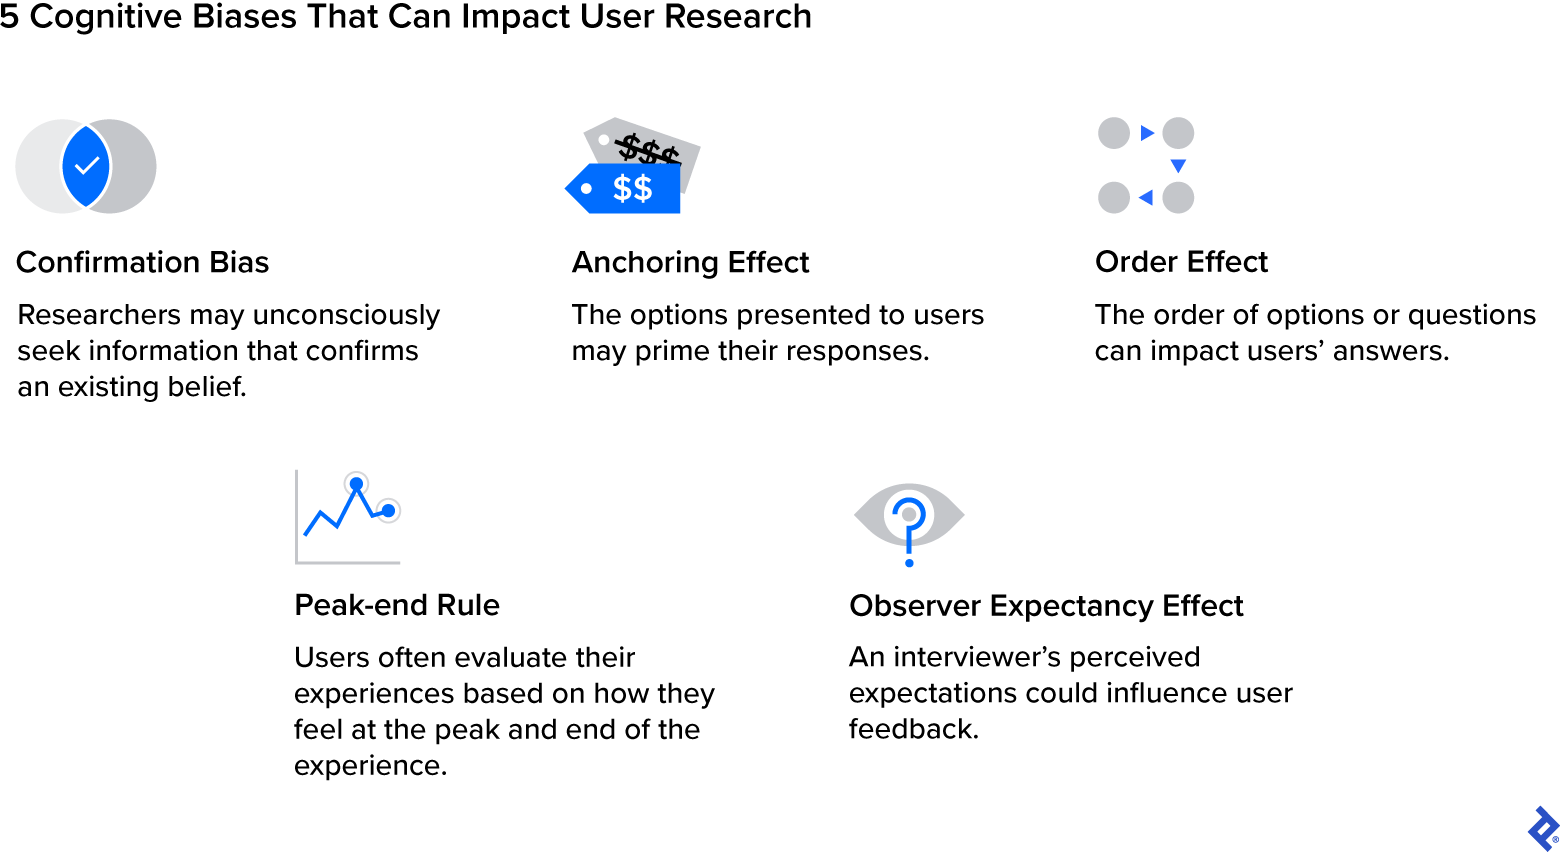 Cognitive biases that impact user research include confirmation bias, anchoring effect, order effect, peak-end rule, and observer-expectancy effect.